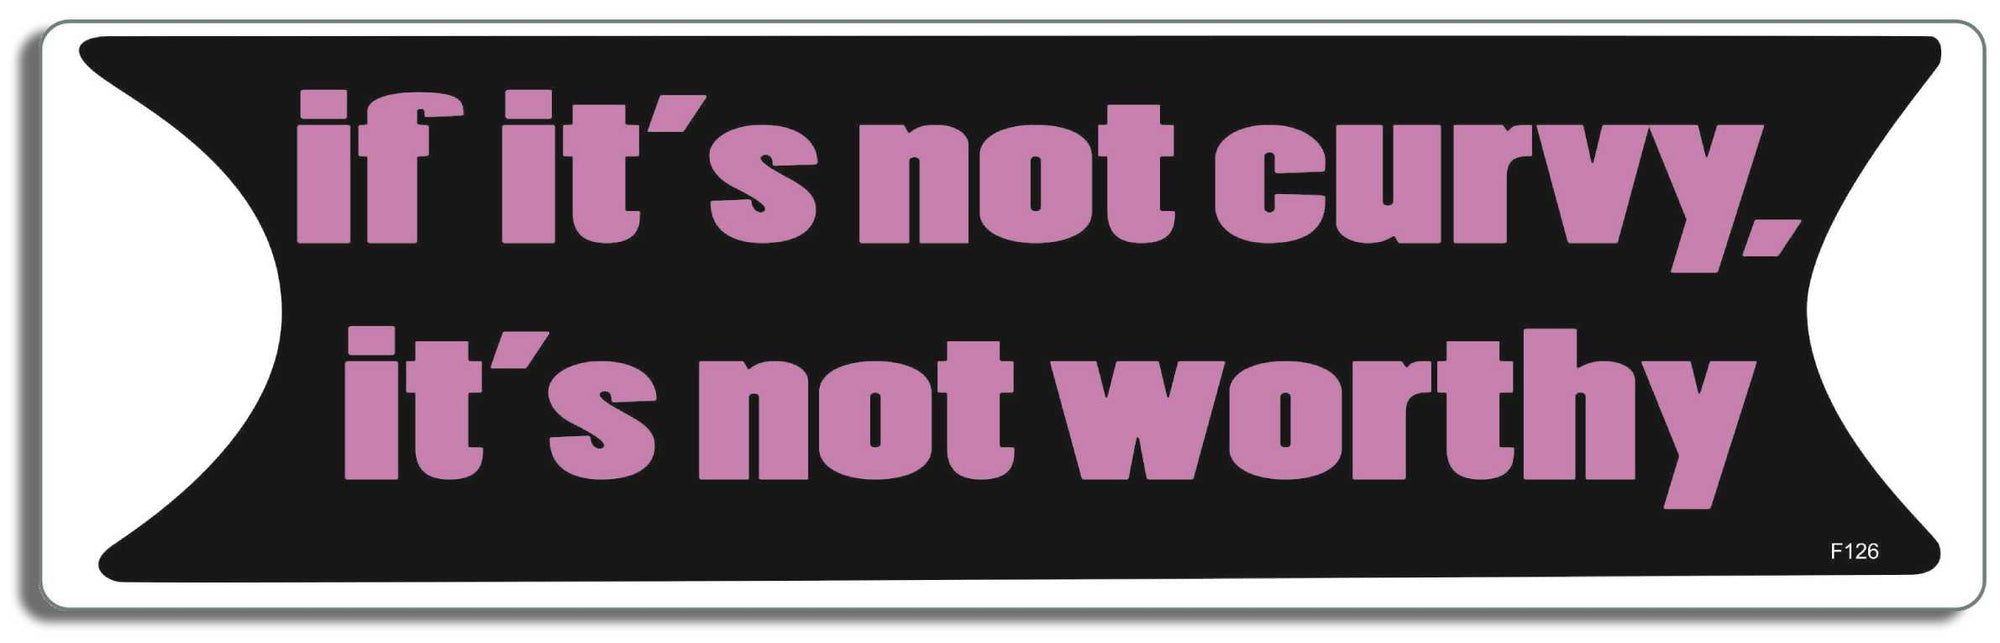 If it's not curvy, it's not worthy - 3" x 10" Bumper Sticker--Car Magnet- -  Decal Bumper Sticker-funny Bumper Sticker Car Magnet If it's not curvy, it's not worthy-  Decal for carsFat